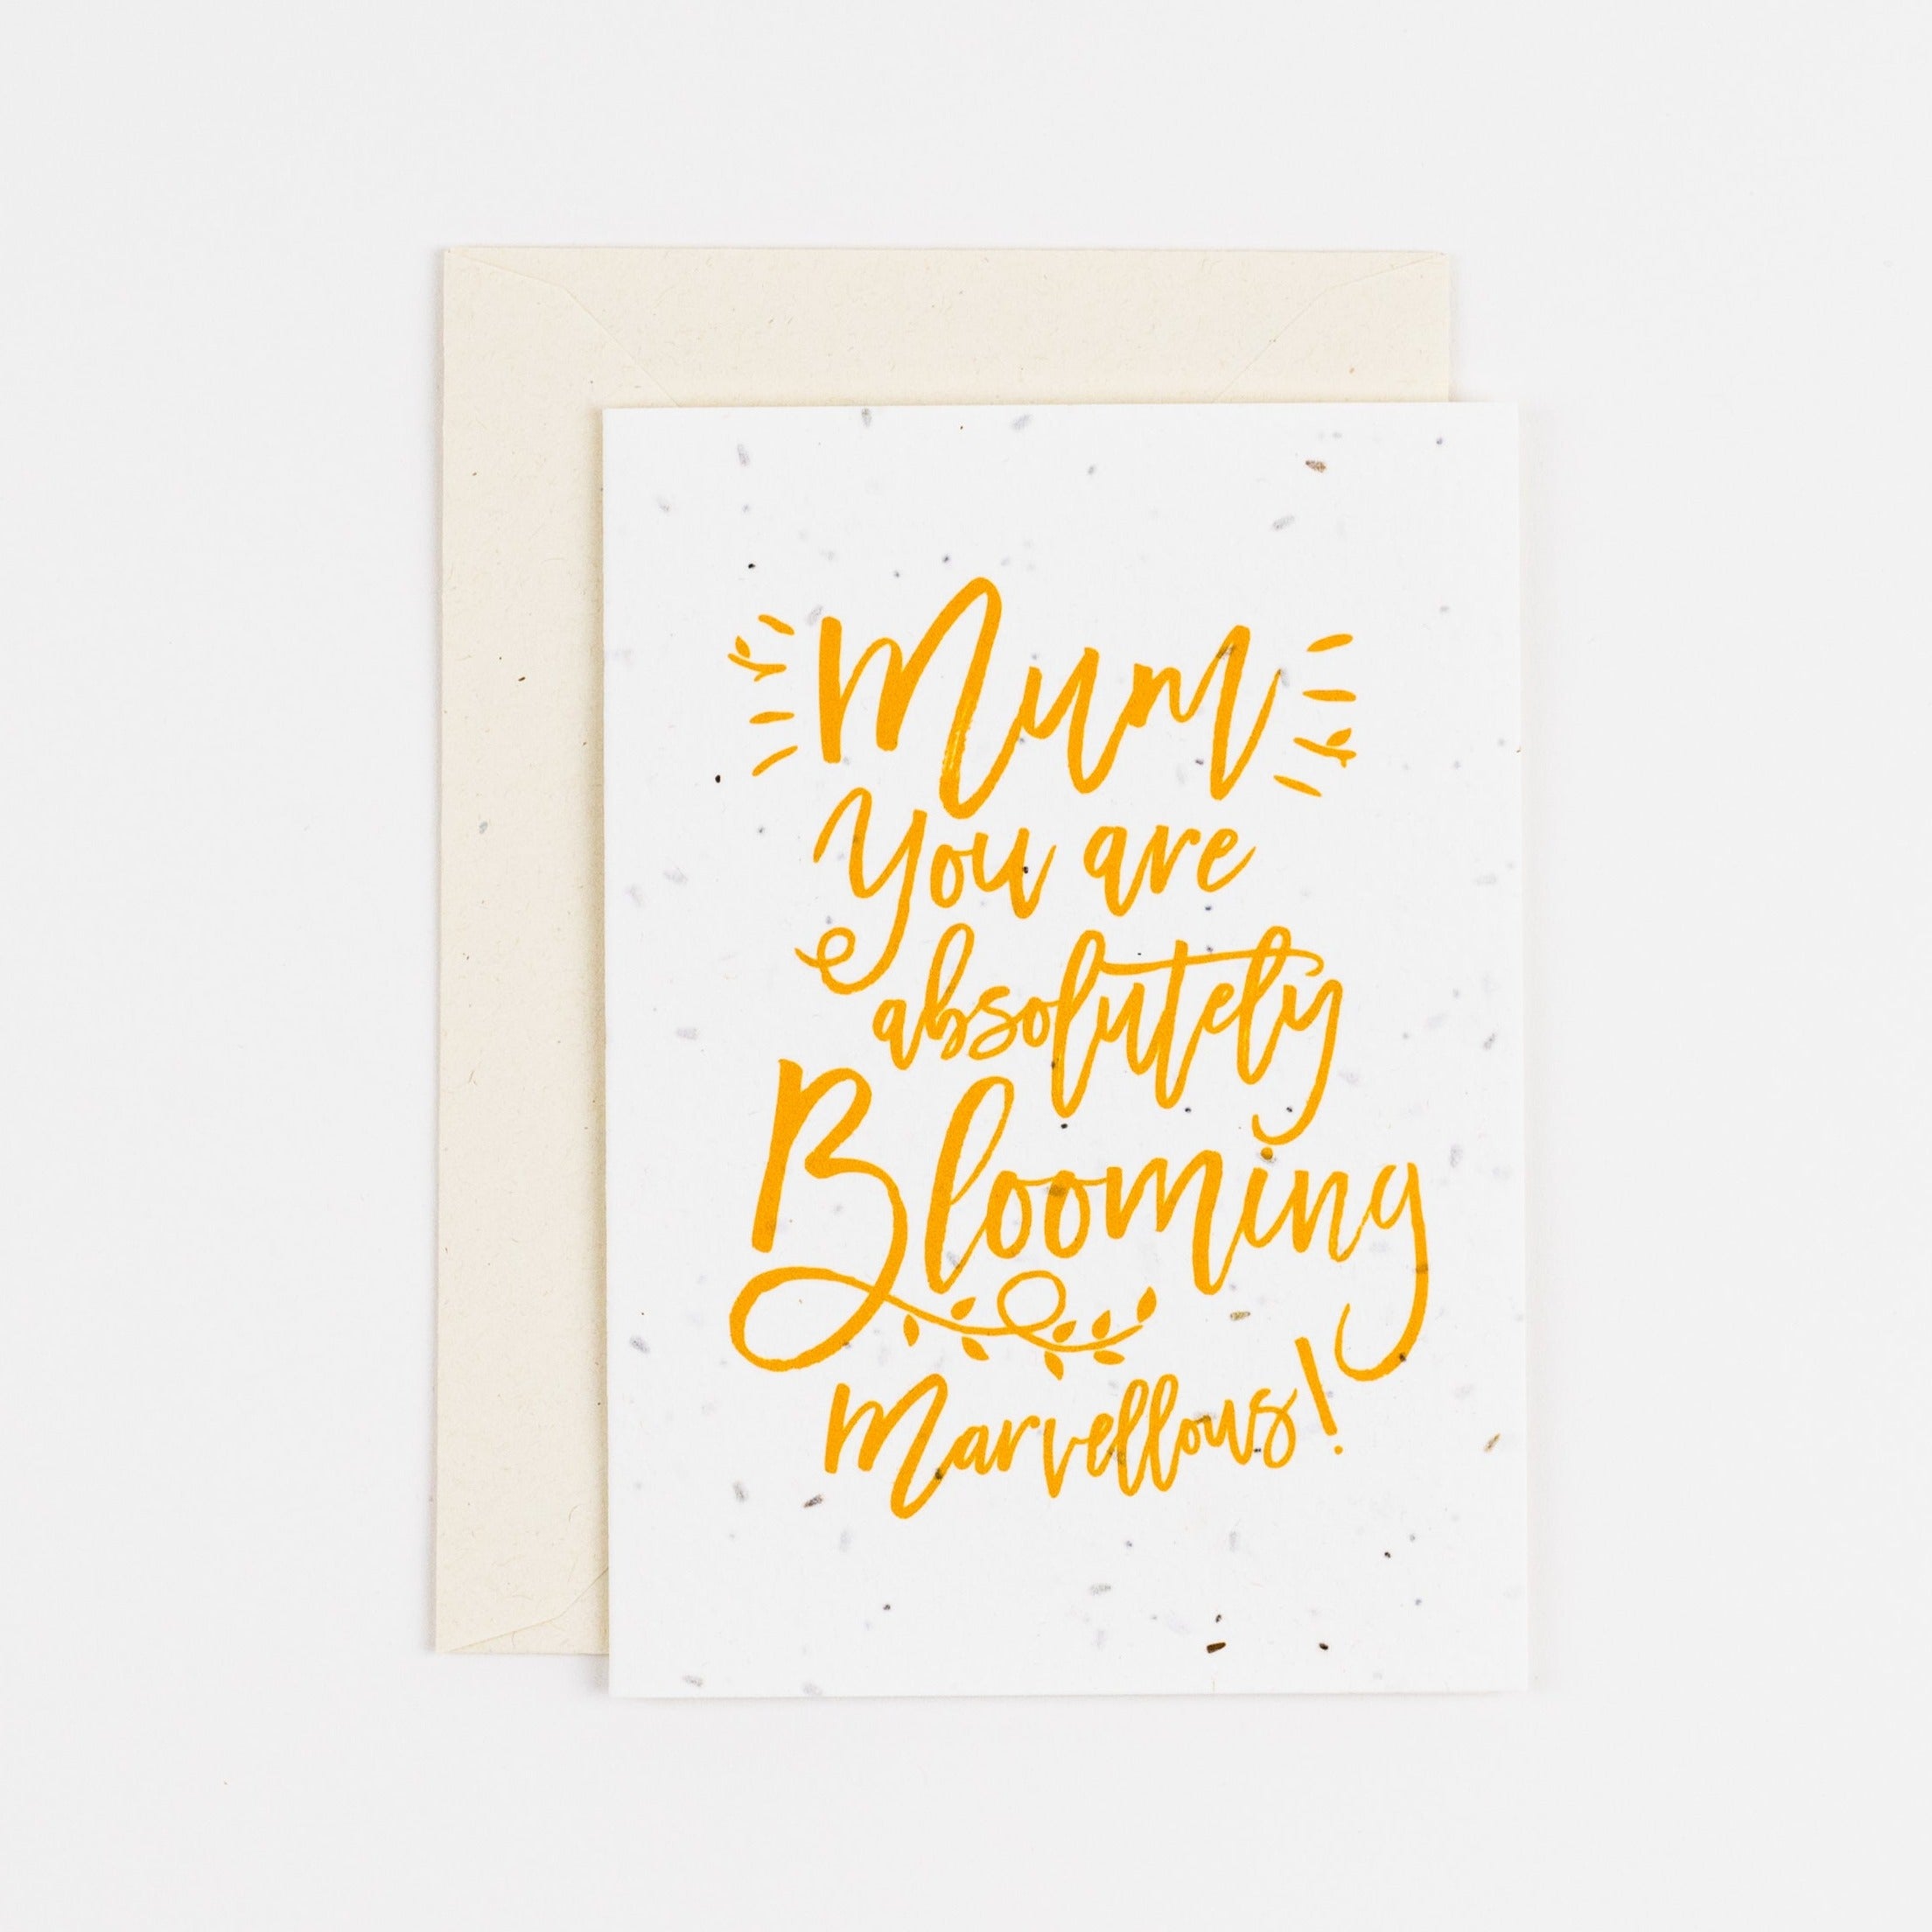 mum you are absolutely blooming marvellous plantable card in yellow